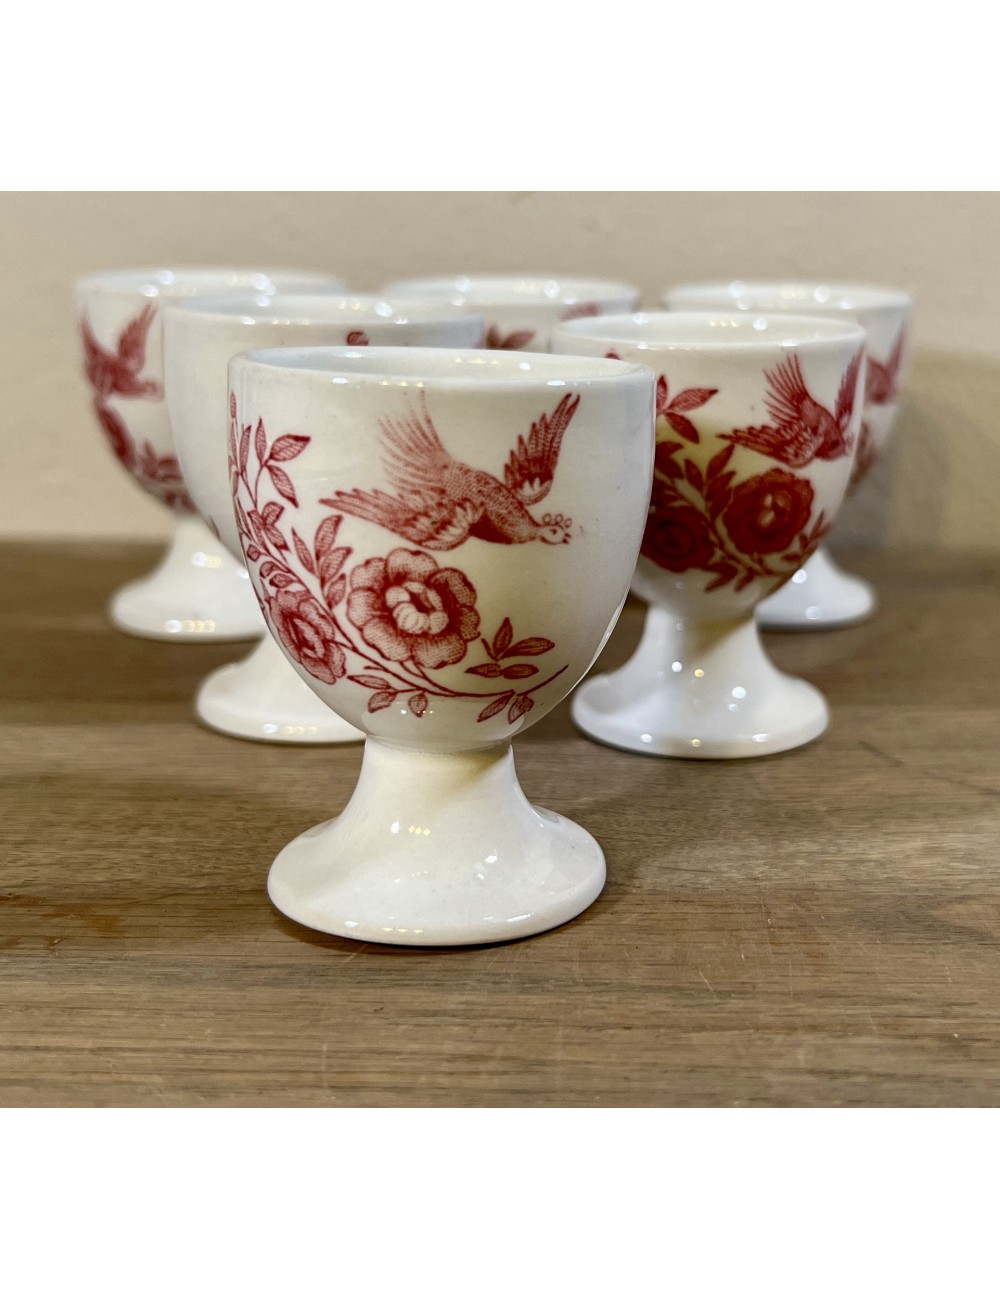 Egg cup - Ridgway Staffordshire - model WINDSOR with image of flowers and pheasant in red